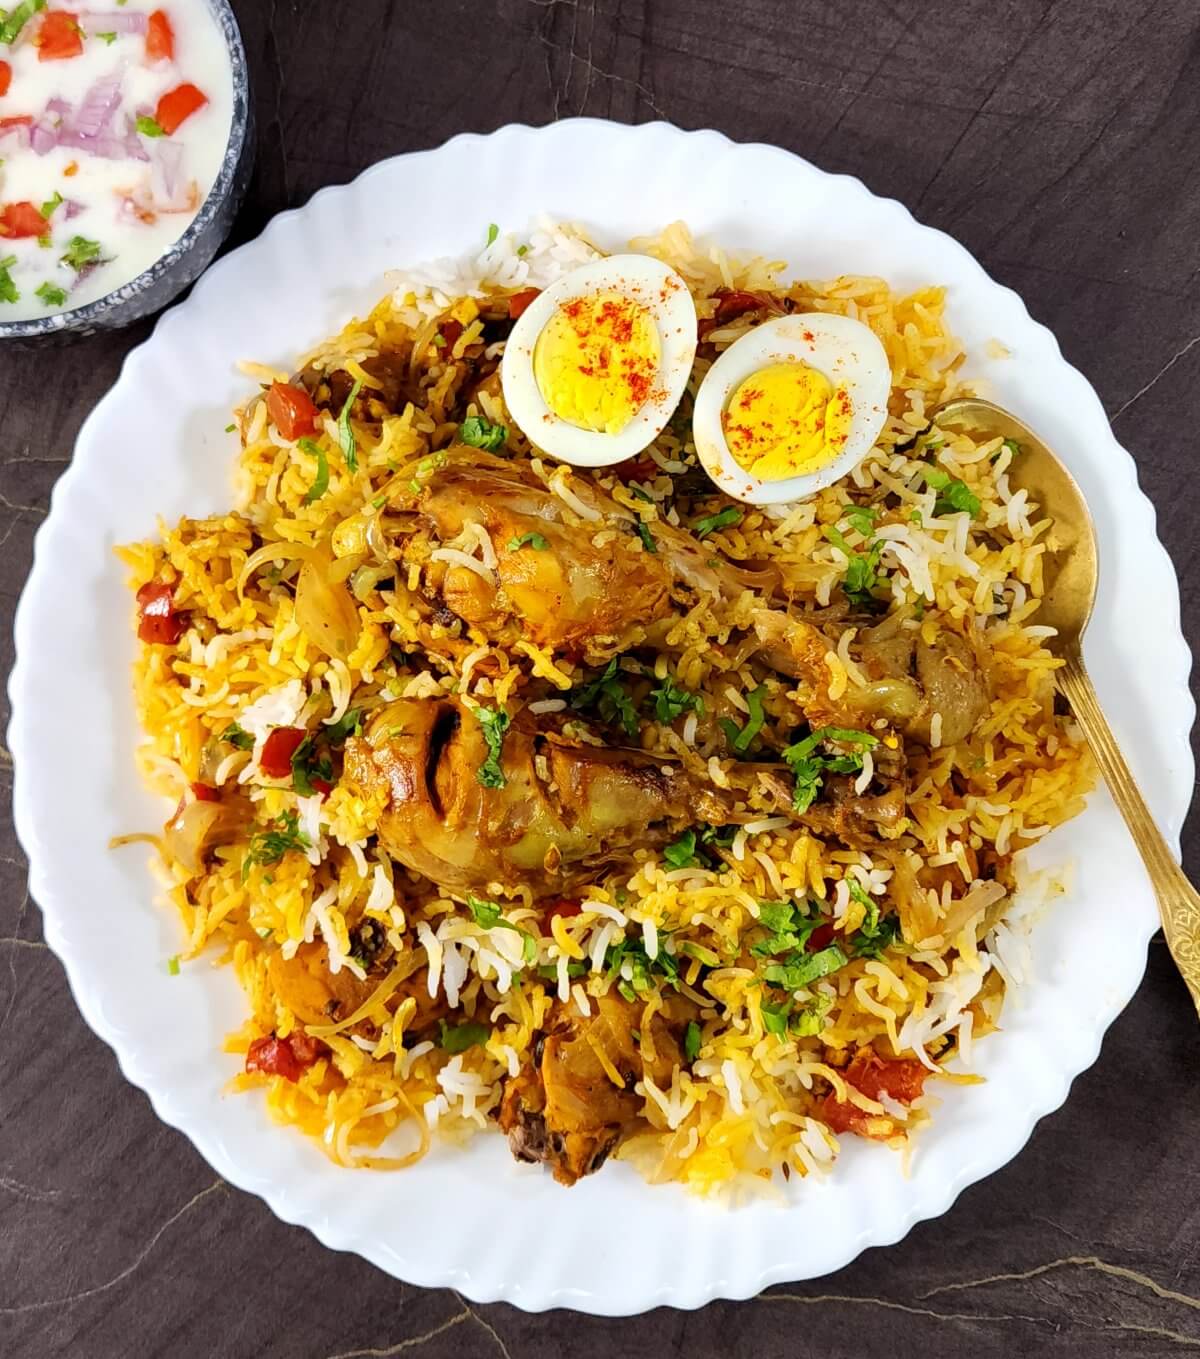 Authentic chicken biryani served in a white plate along with golden spoon and a bowl of raita/yogurt salad.